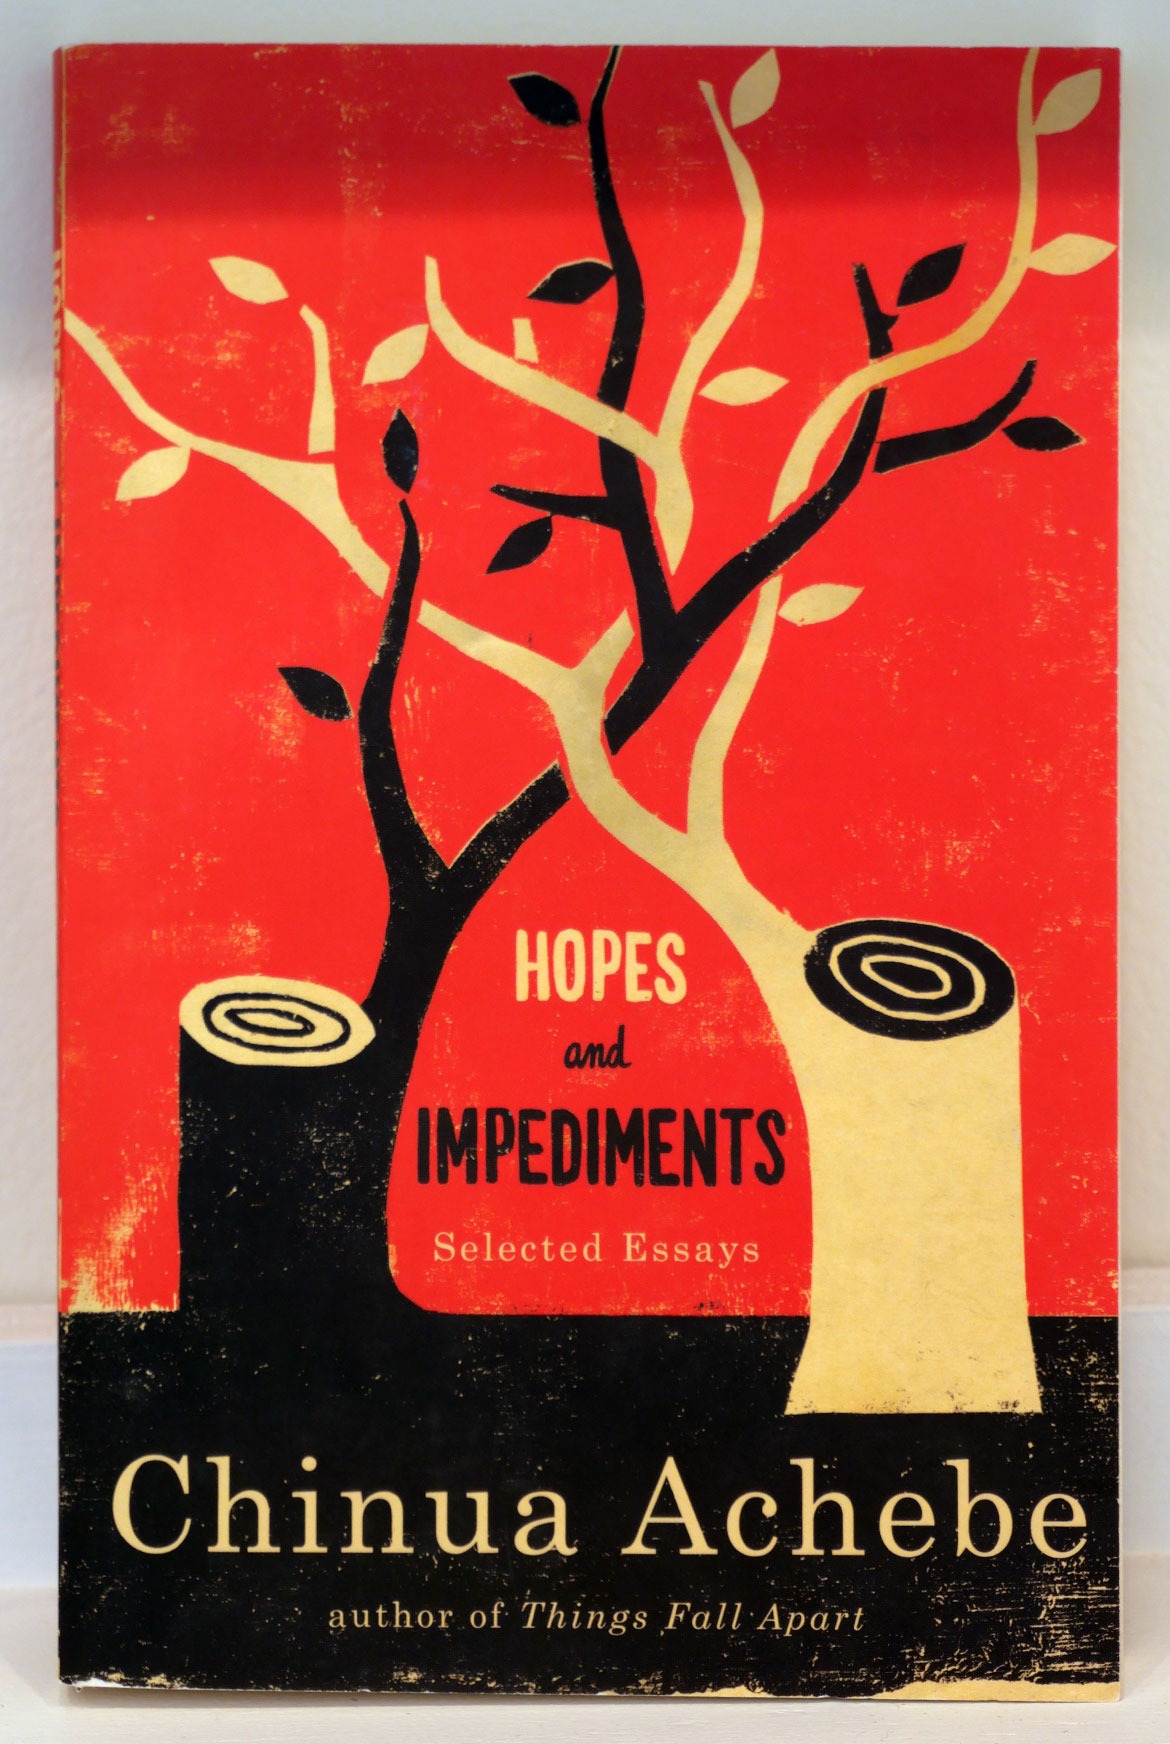 Edel Rodriguez's cover illustration for Chinua Achebe's book "Hopes and Impediments"